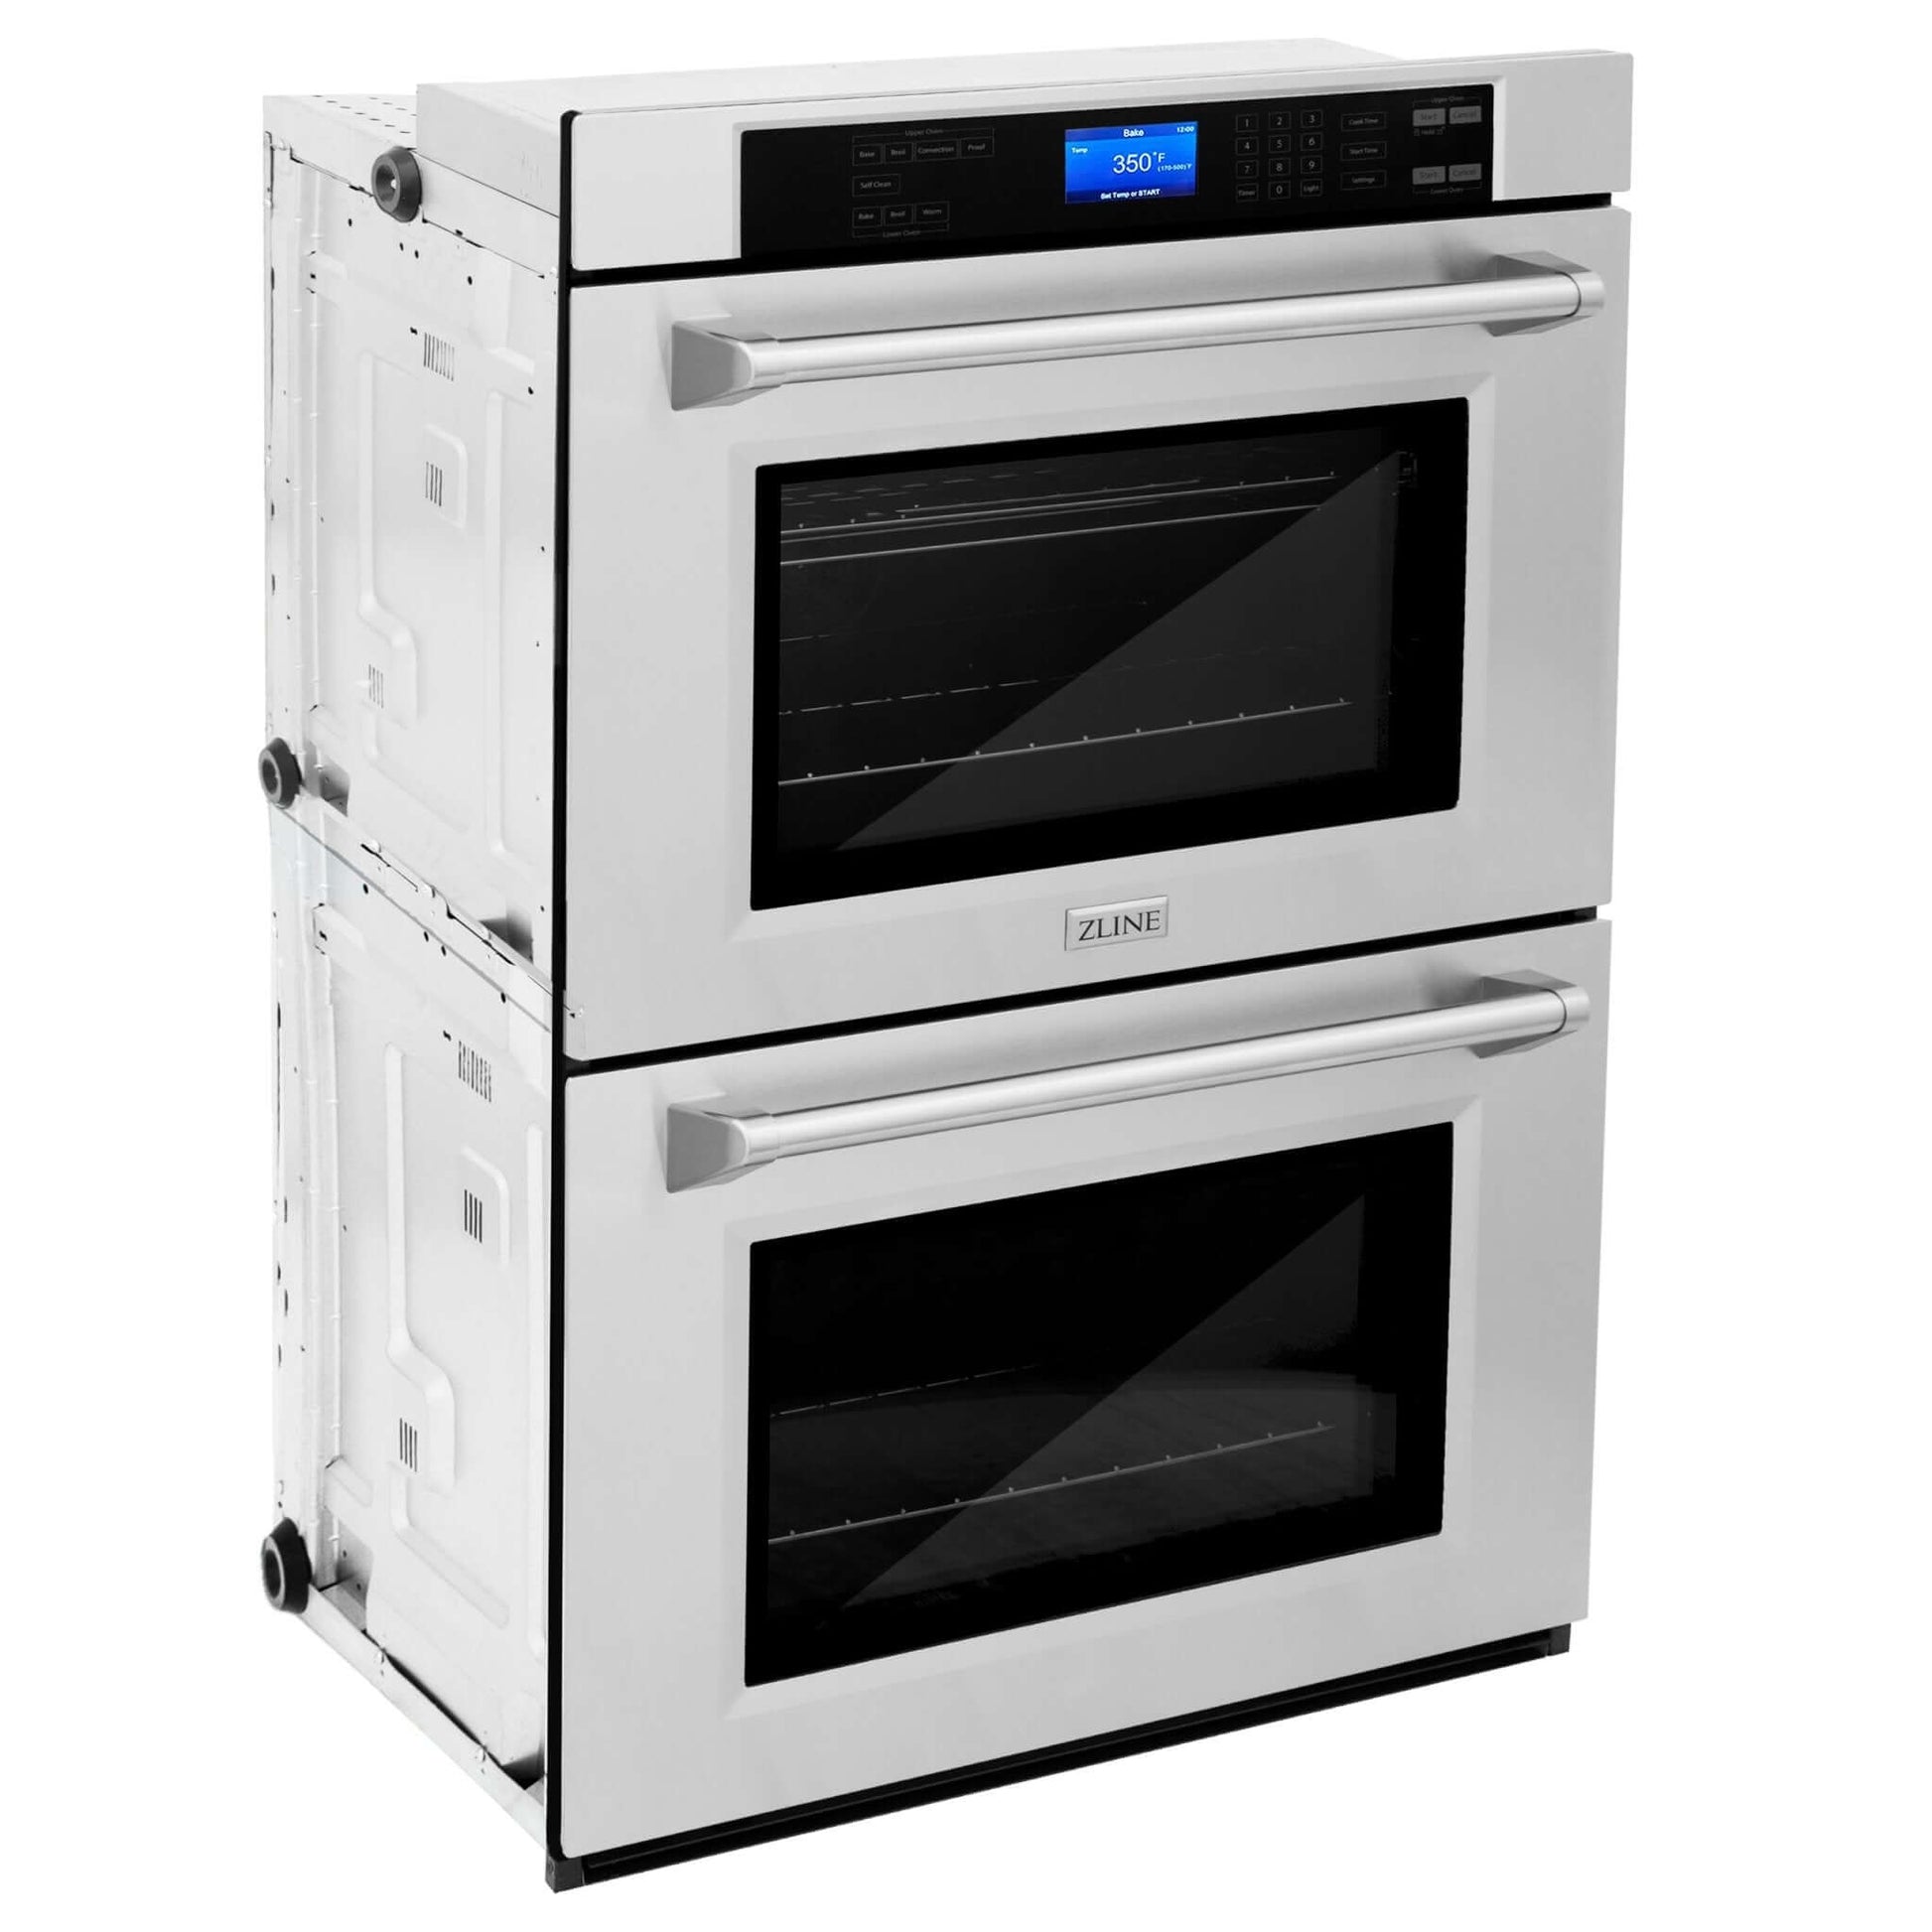 ZLINE 30 in. Electric Double Wall Oven (AWD-30) side, doors closed.